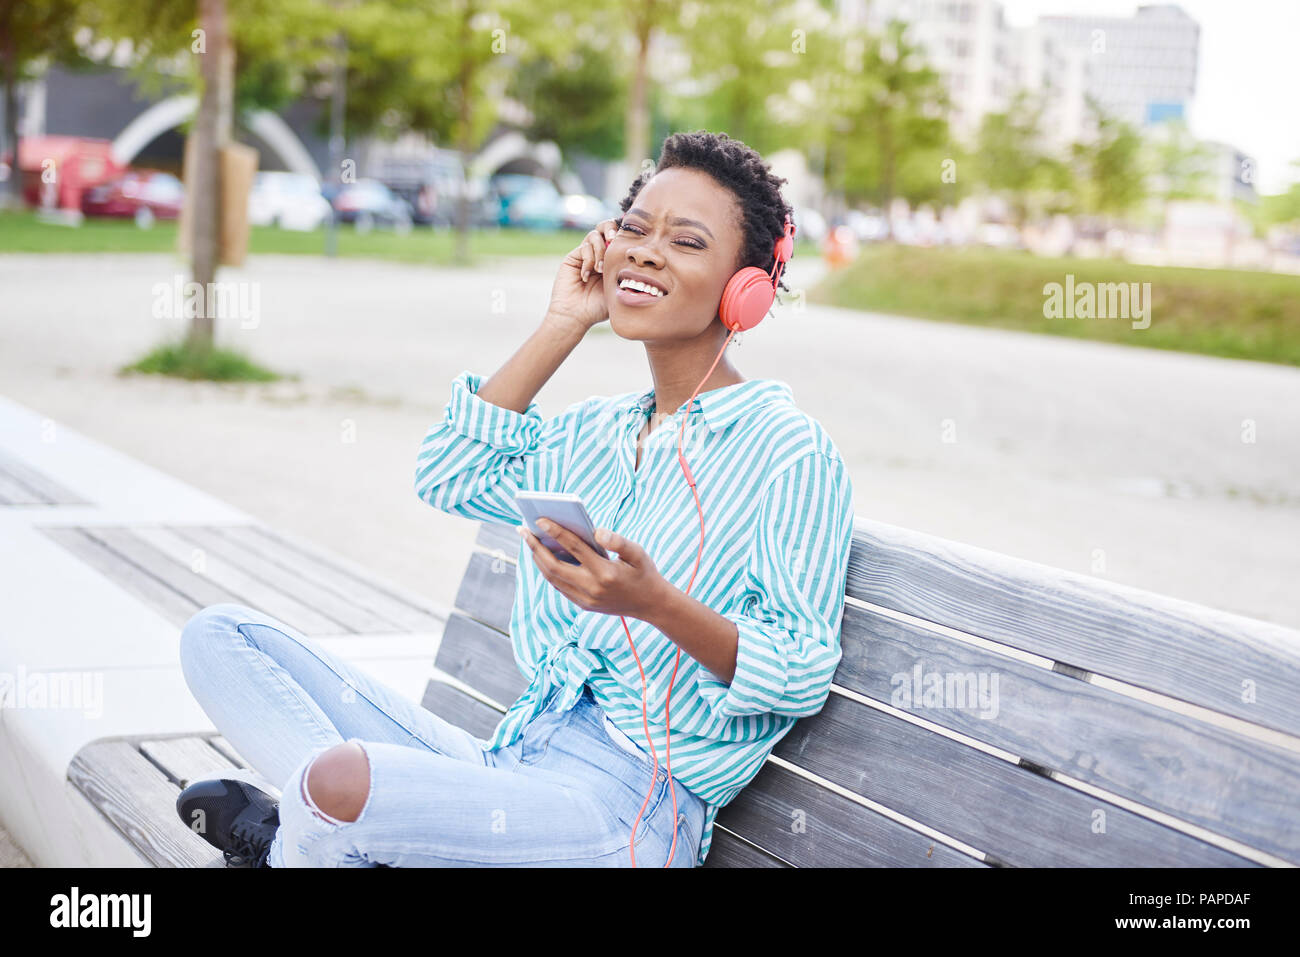 Portrait of young woman sitting on bench listening music with cell phone and headphones Stock Photo